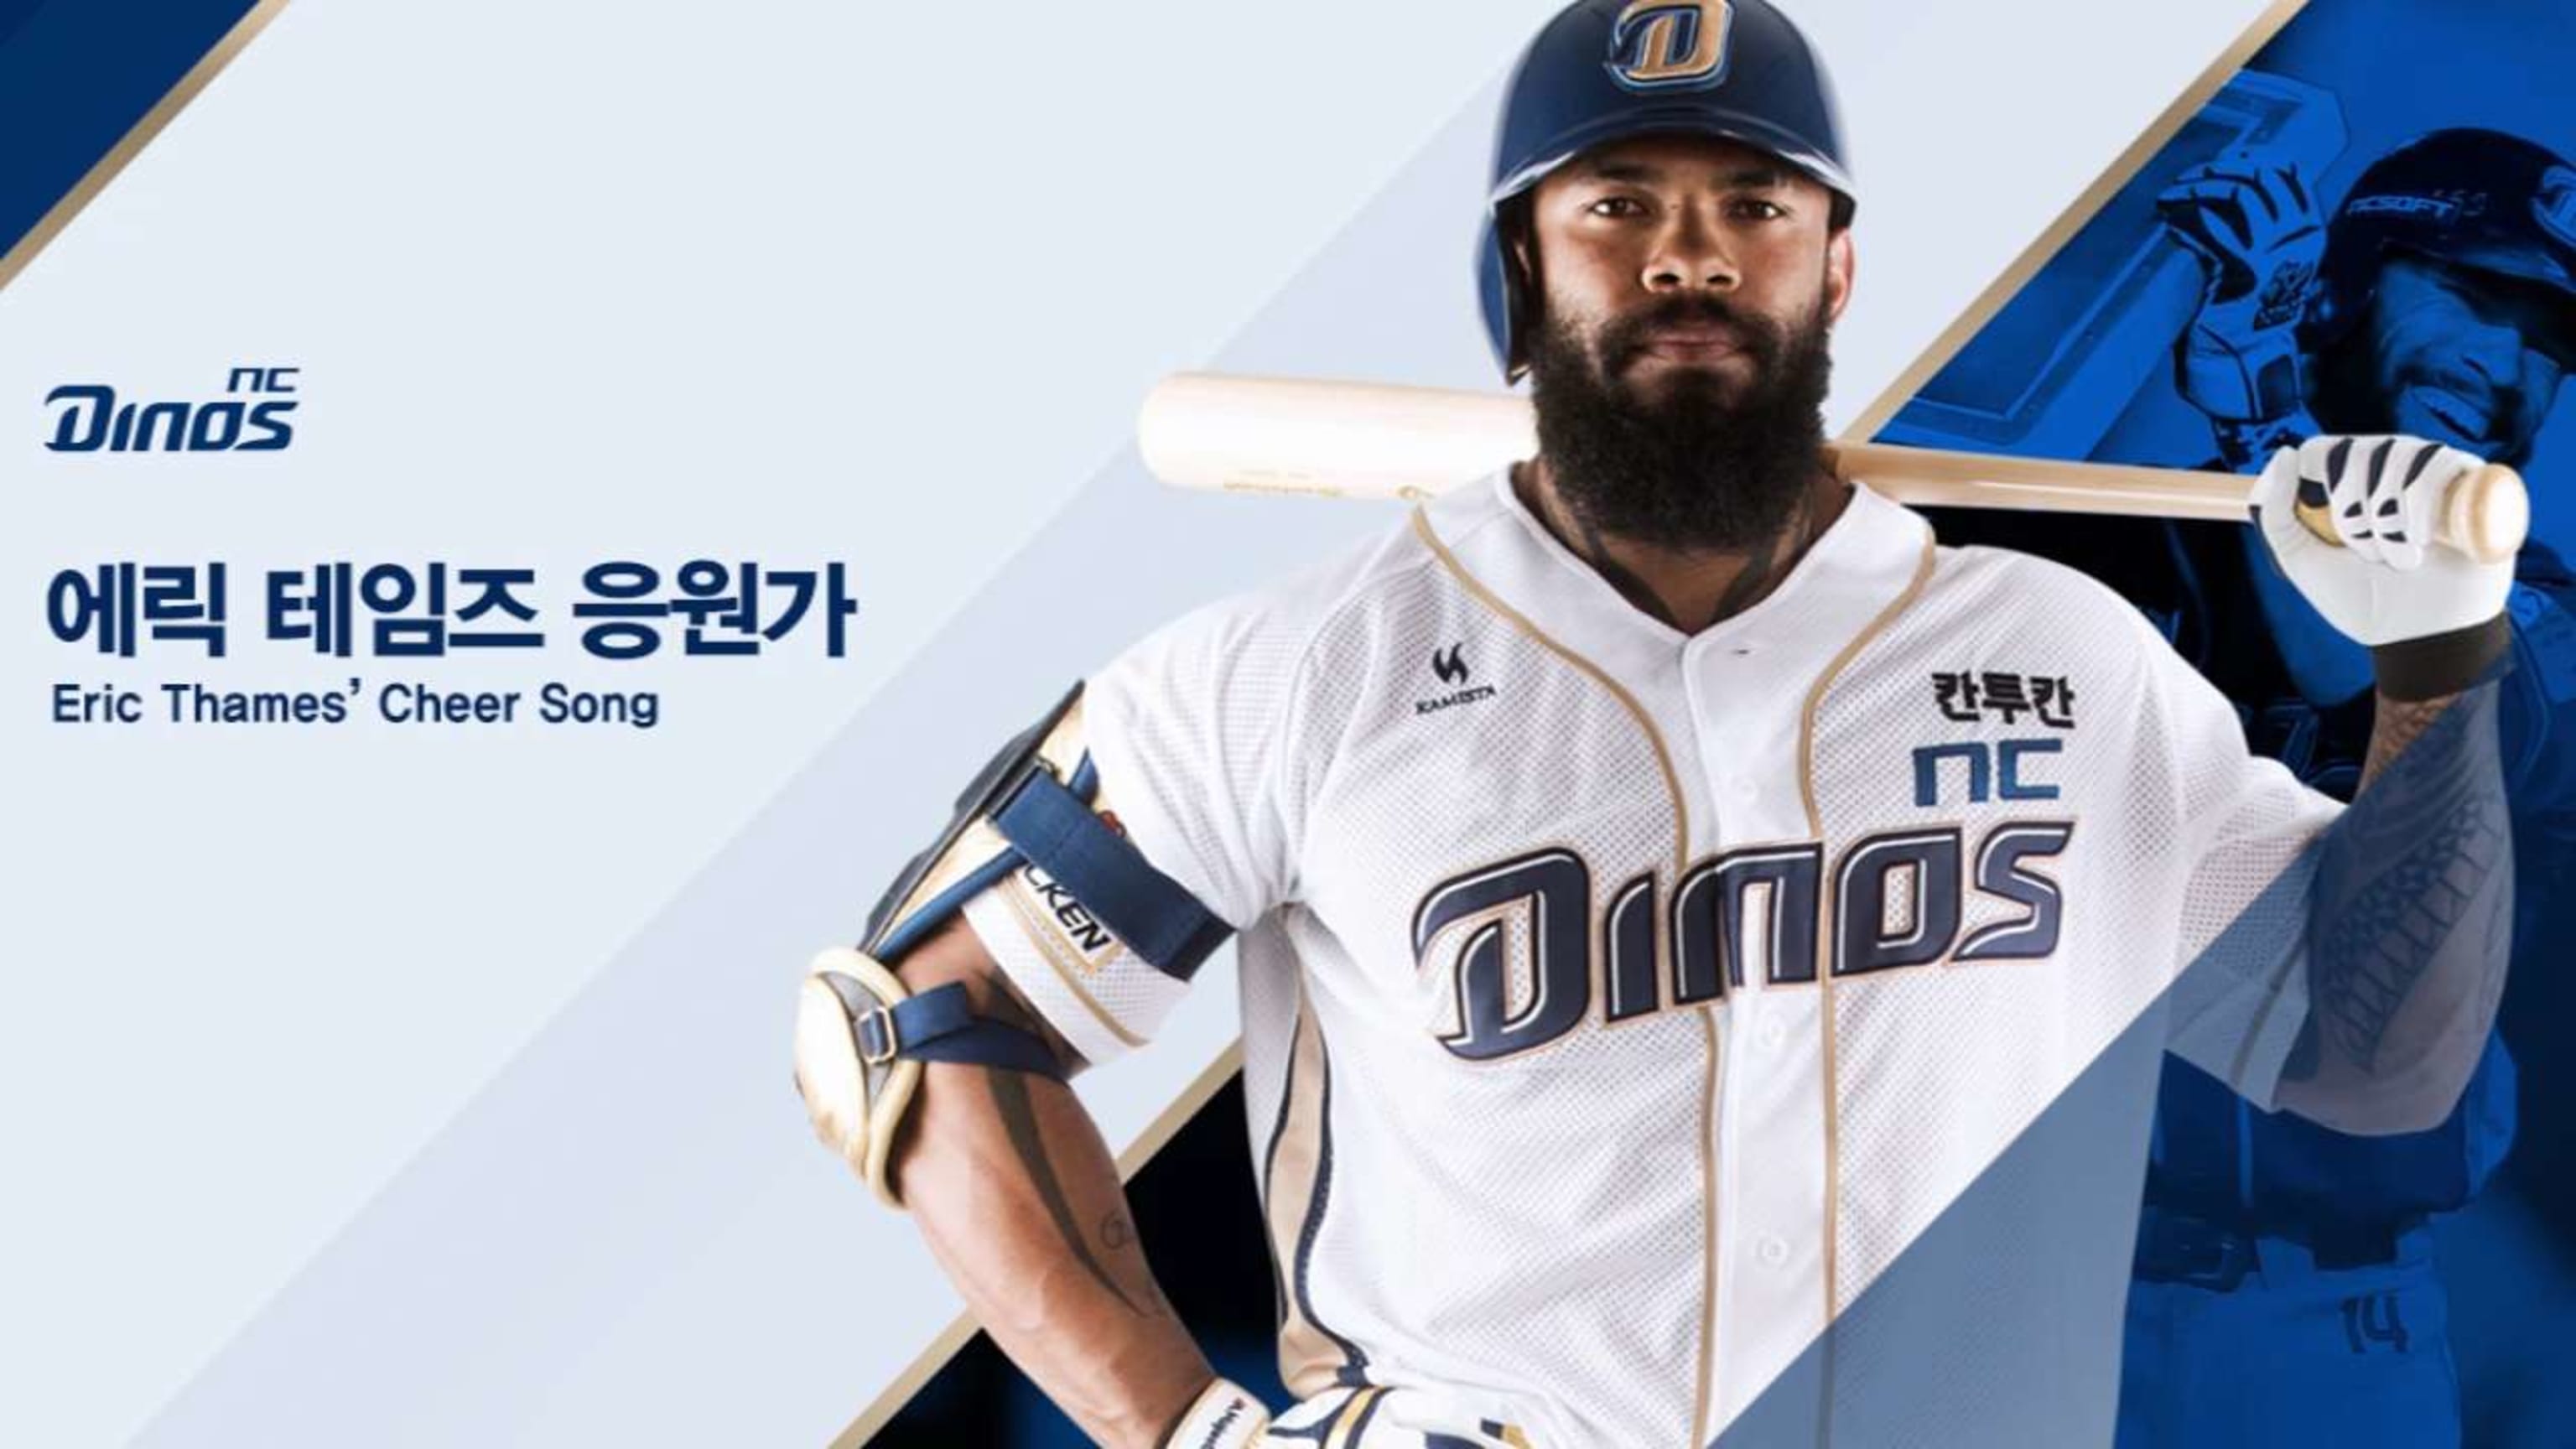 Eric Thames has his own Korean cheer song, and his Brewers